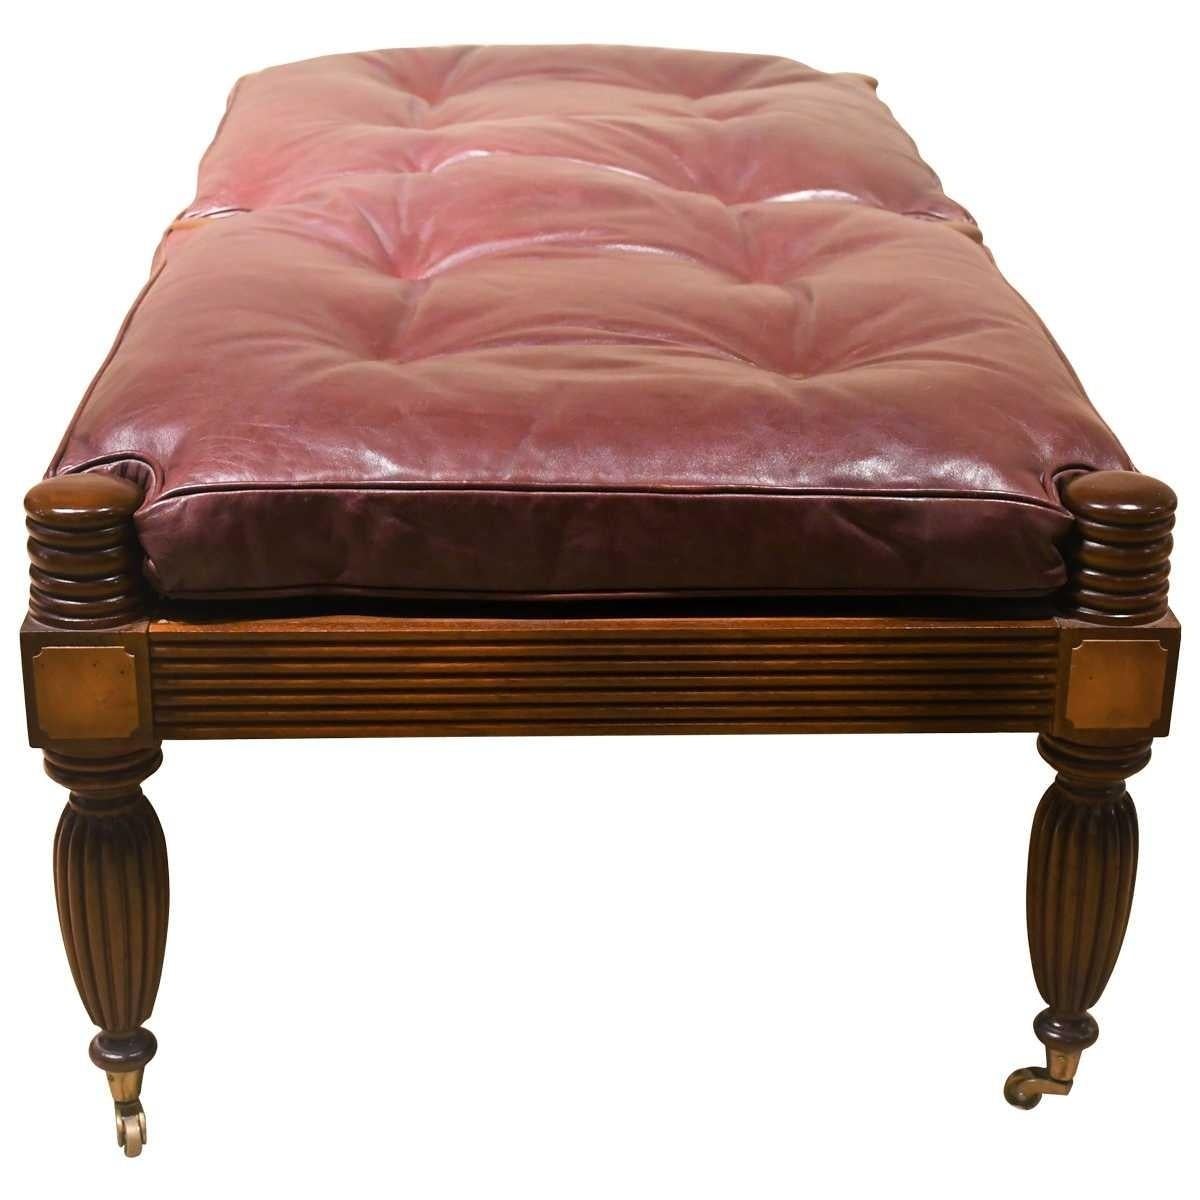 Attractive Regency Style Mahogany Bench with Button Tufted Leather Squab In Excellent Condition For Sale In North Salem, NY